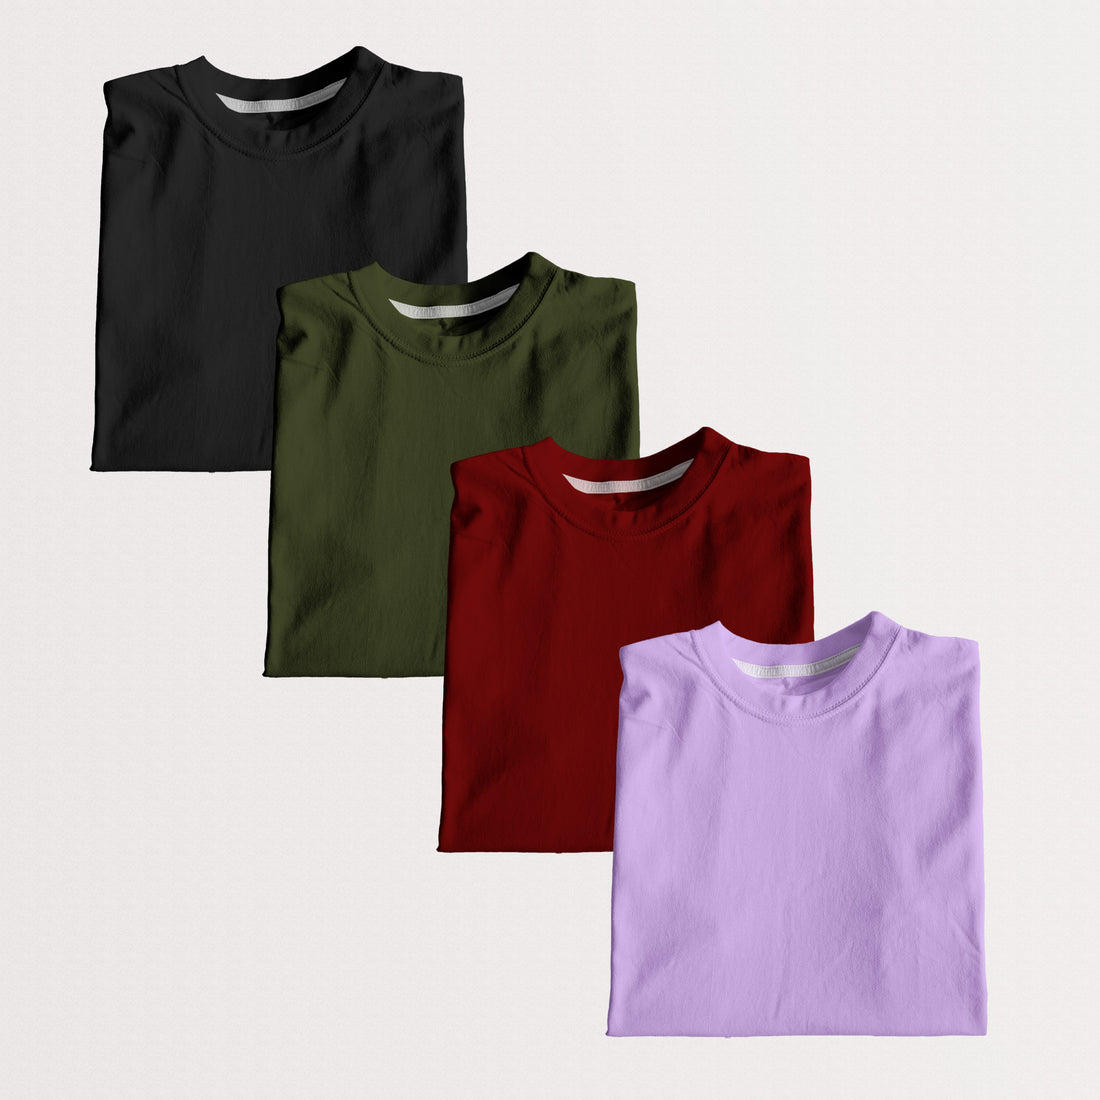 Any Pack of 4 Basic Tees